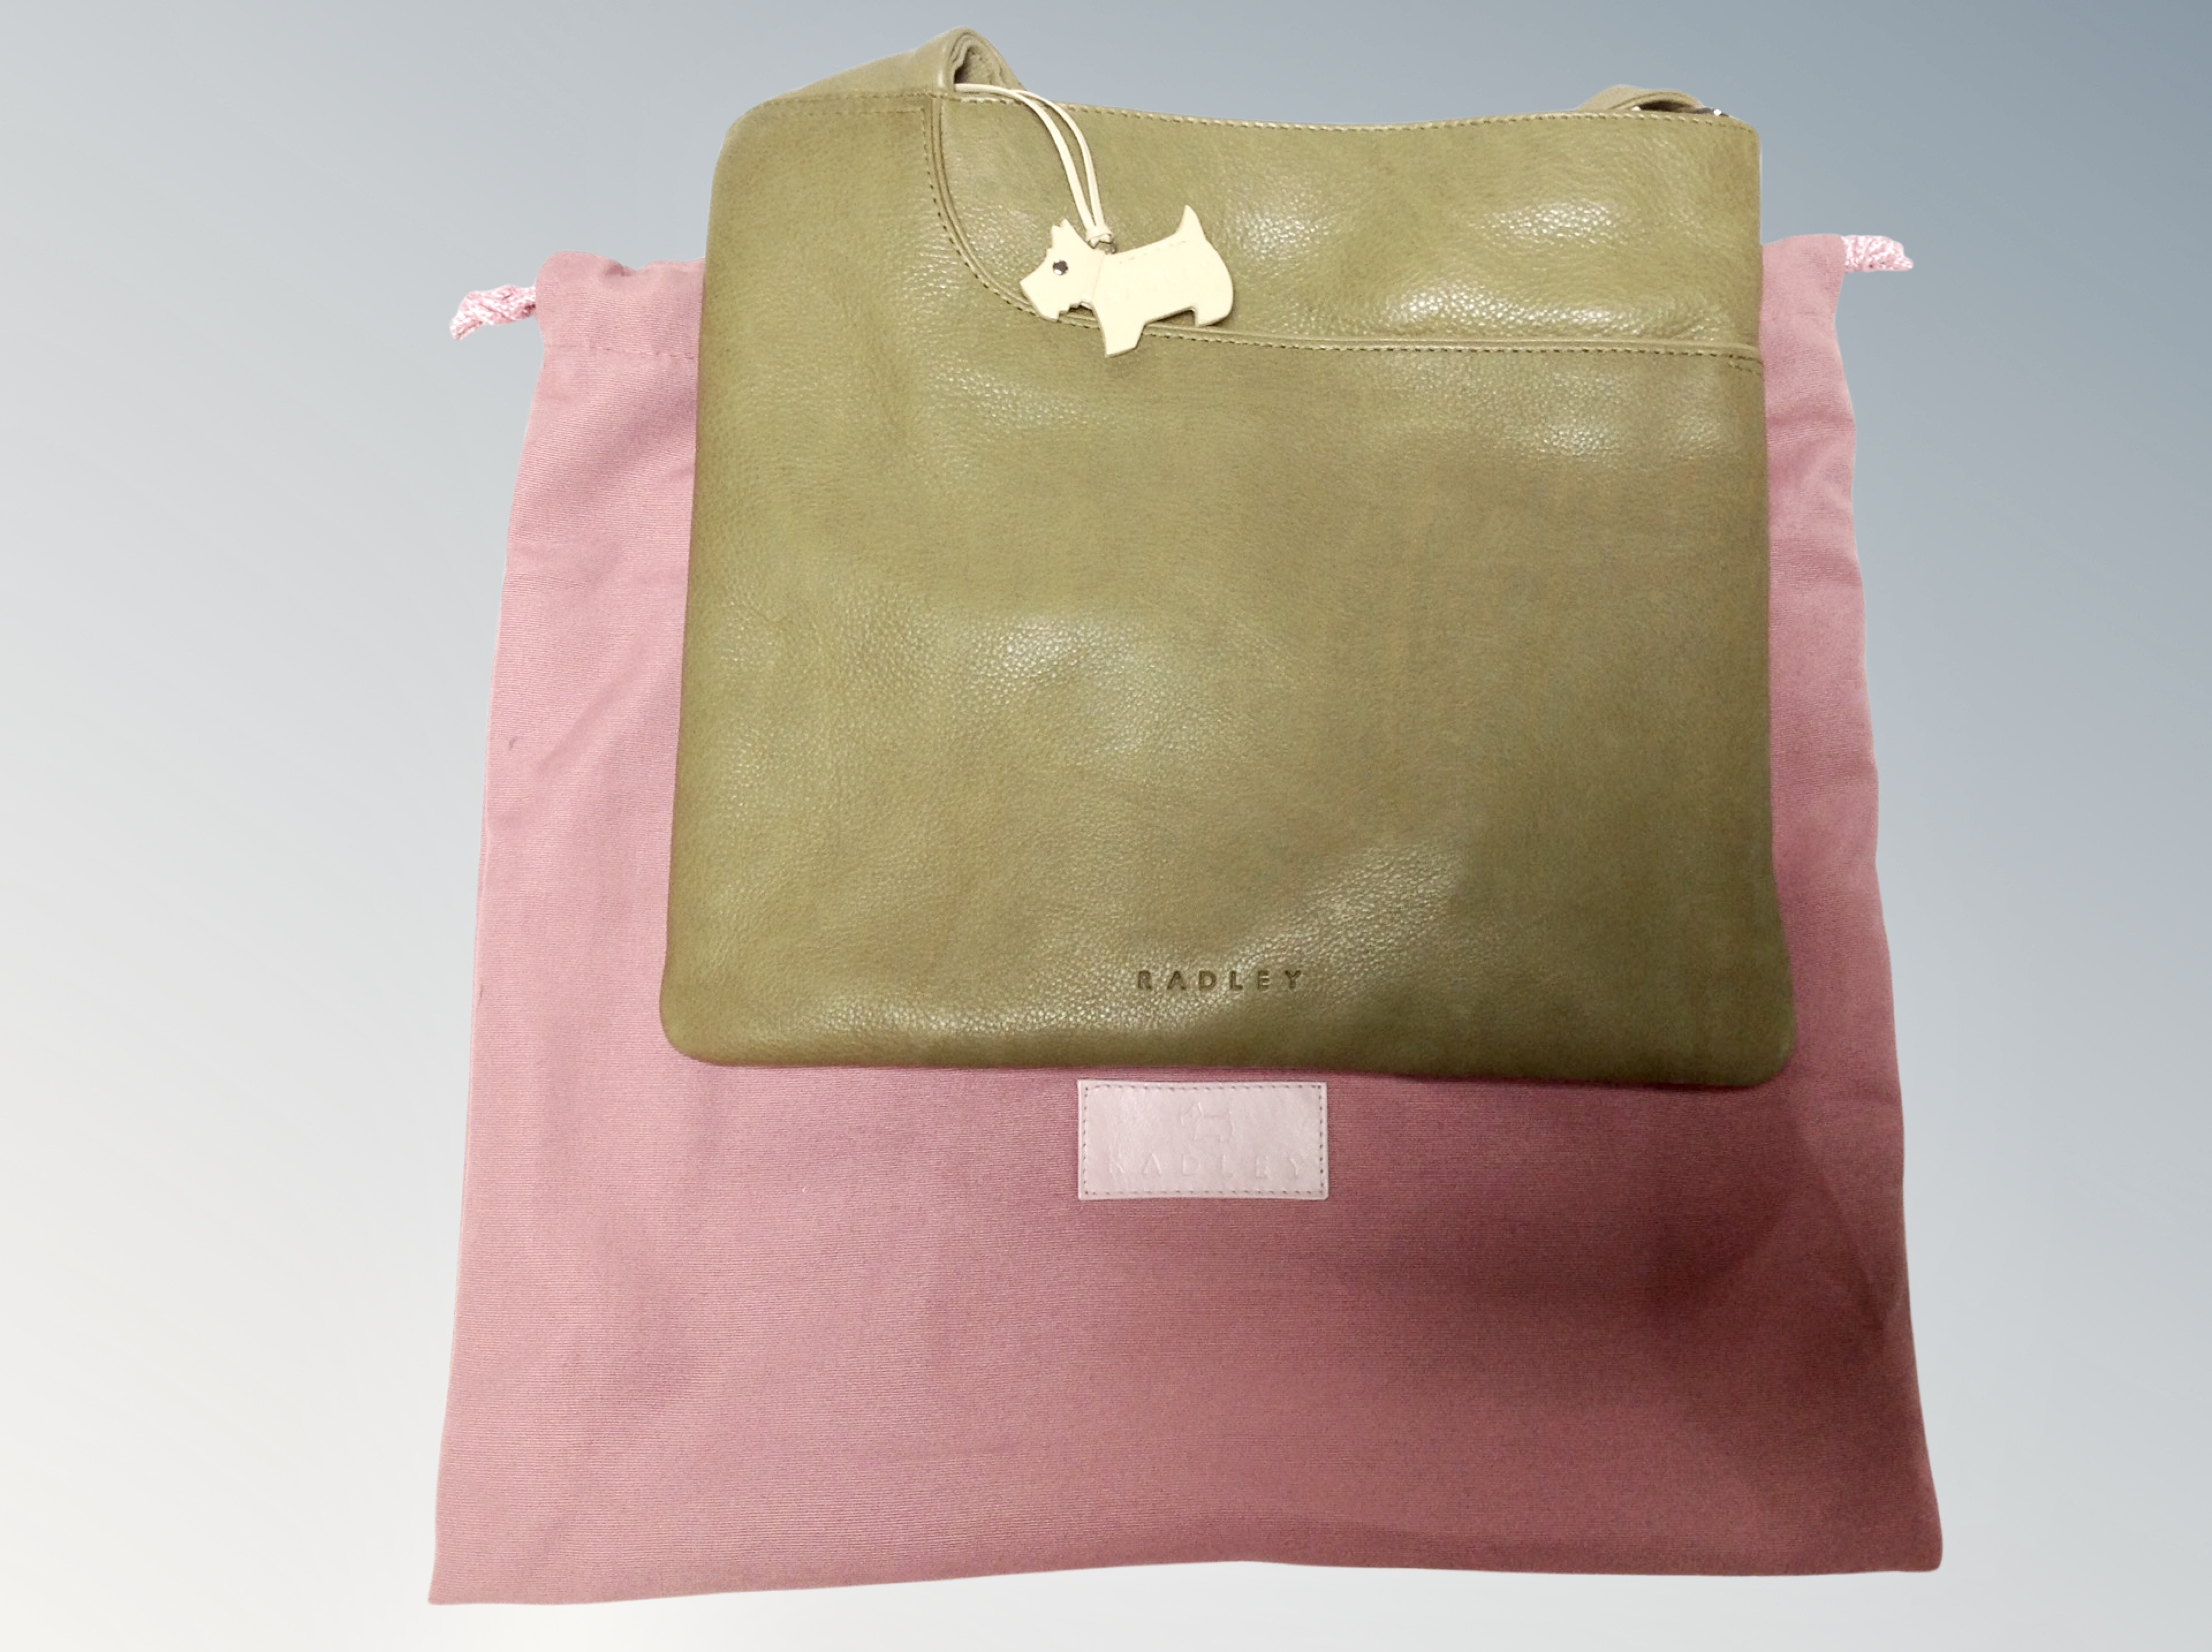 A lady's tan leather Radley shoulder bag together with a further example in olive leather, - Image 2 of 2